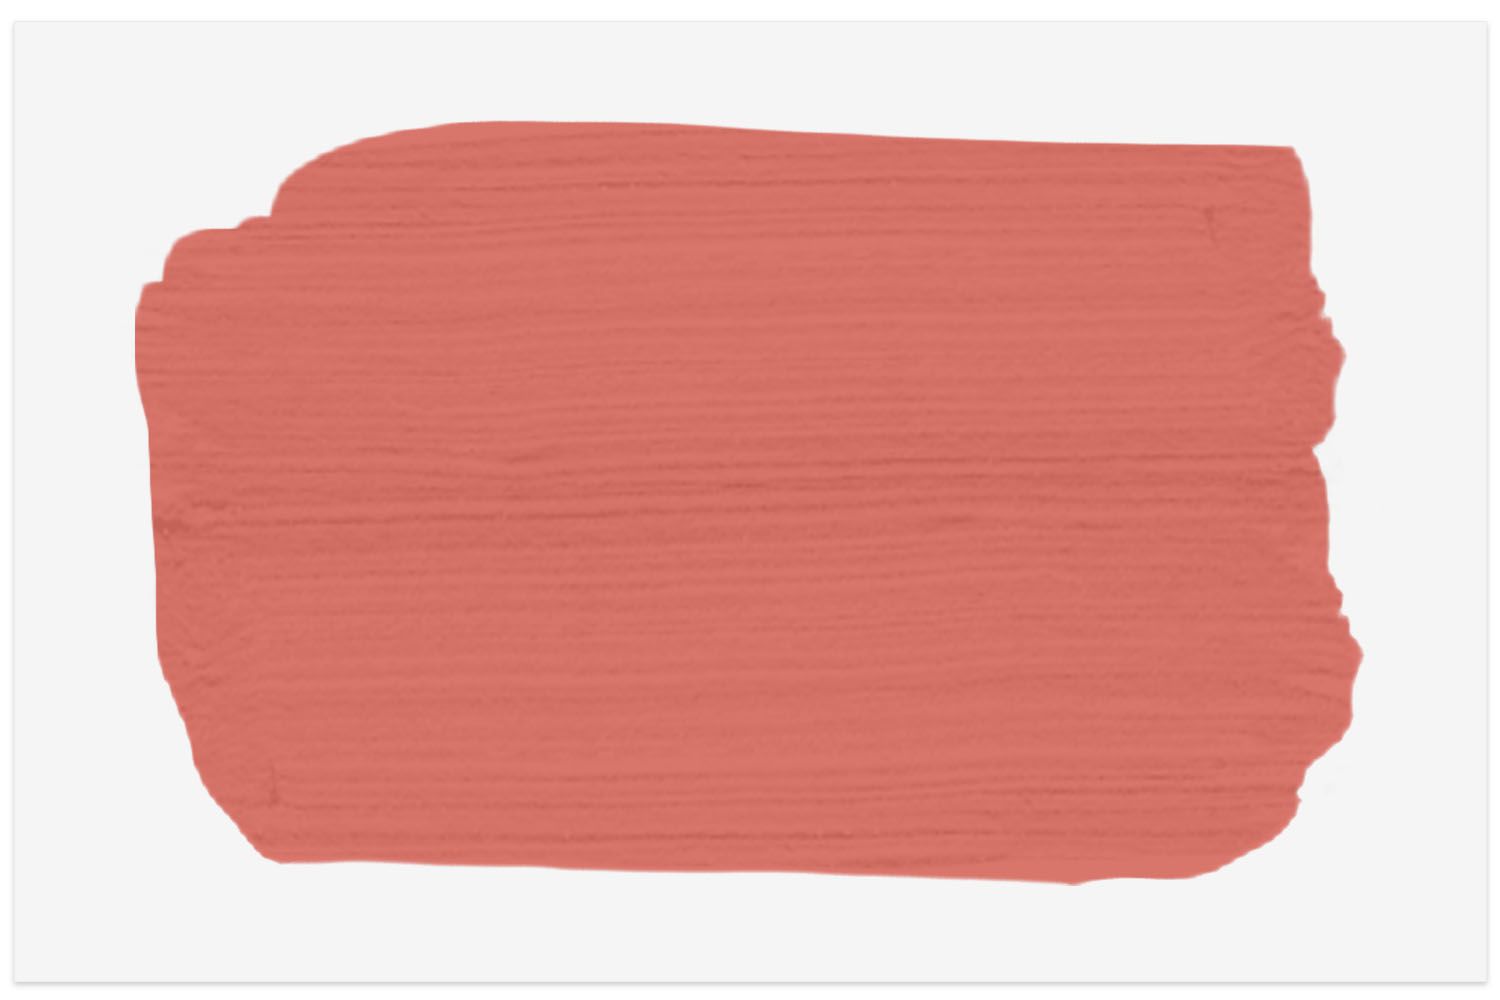 Sherwin Williams Coral Reef paint swatch